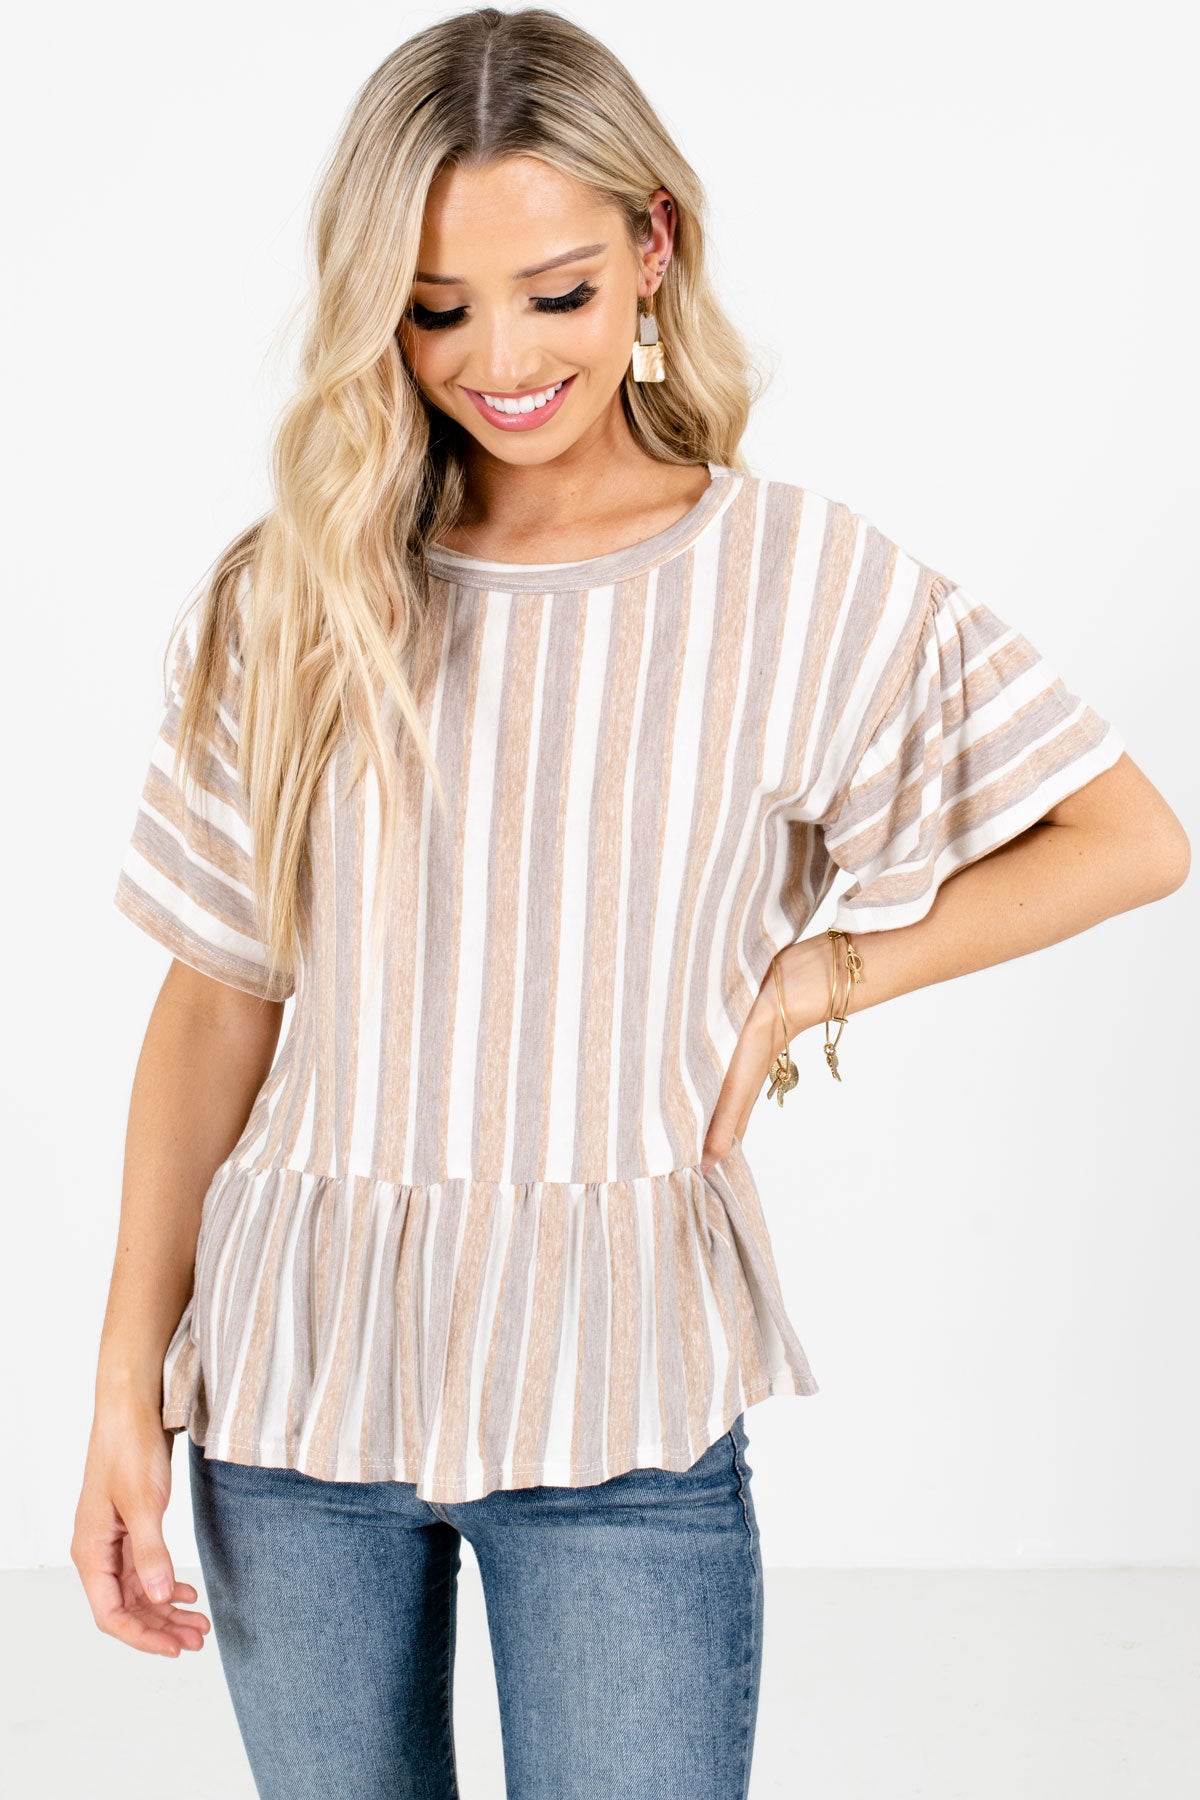 Brown Multi Striped Pattern Boutique Tops for Women